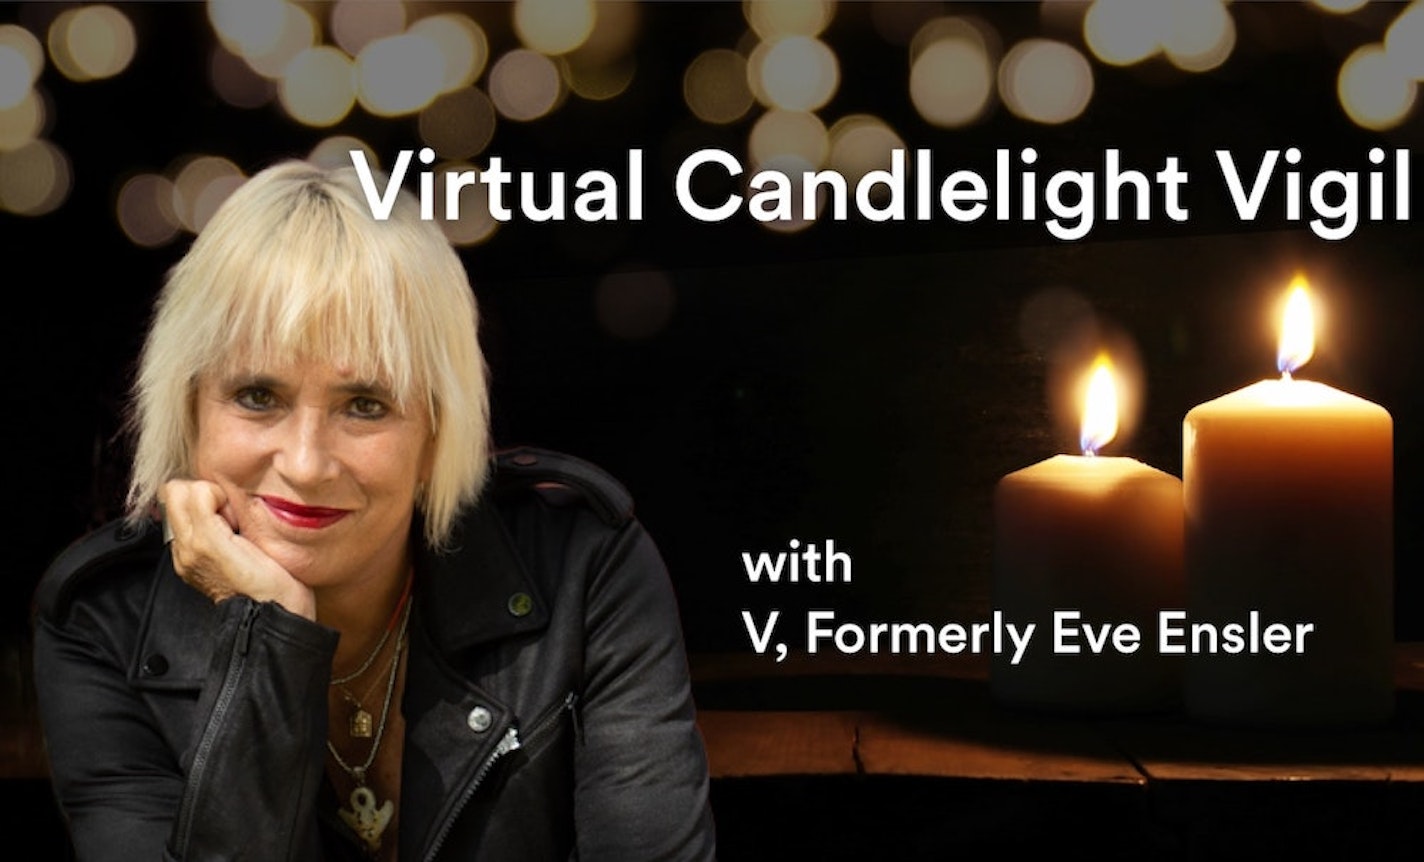 Candlelight Vigil with the creator of The Vagina Monologues